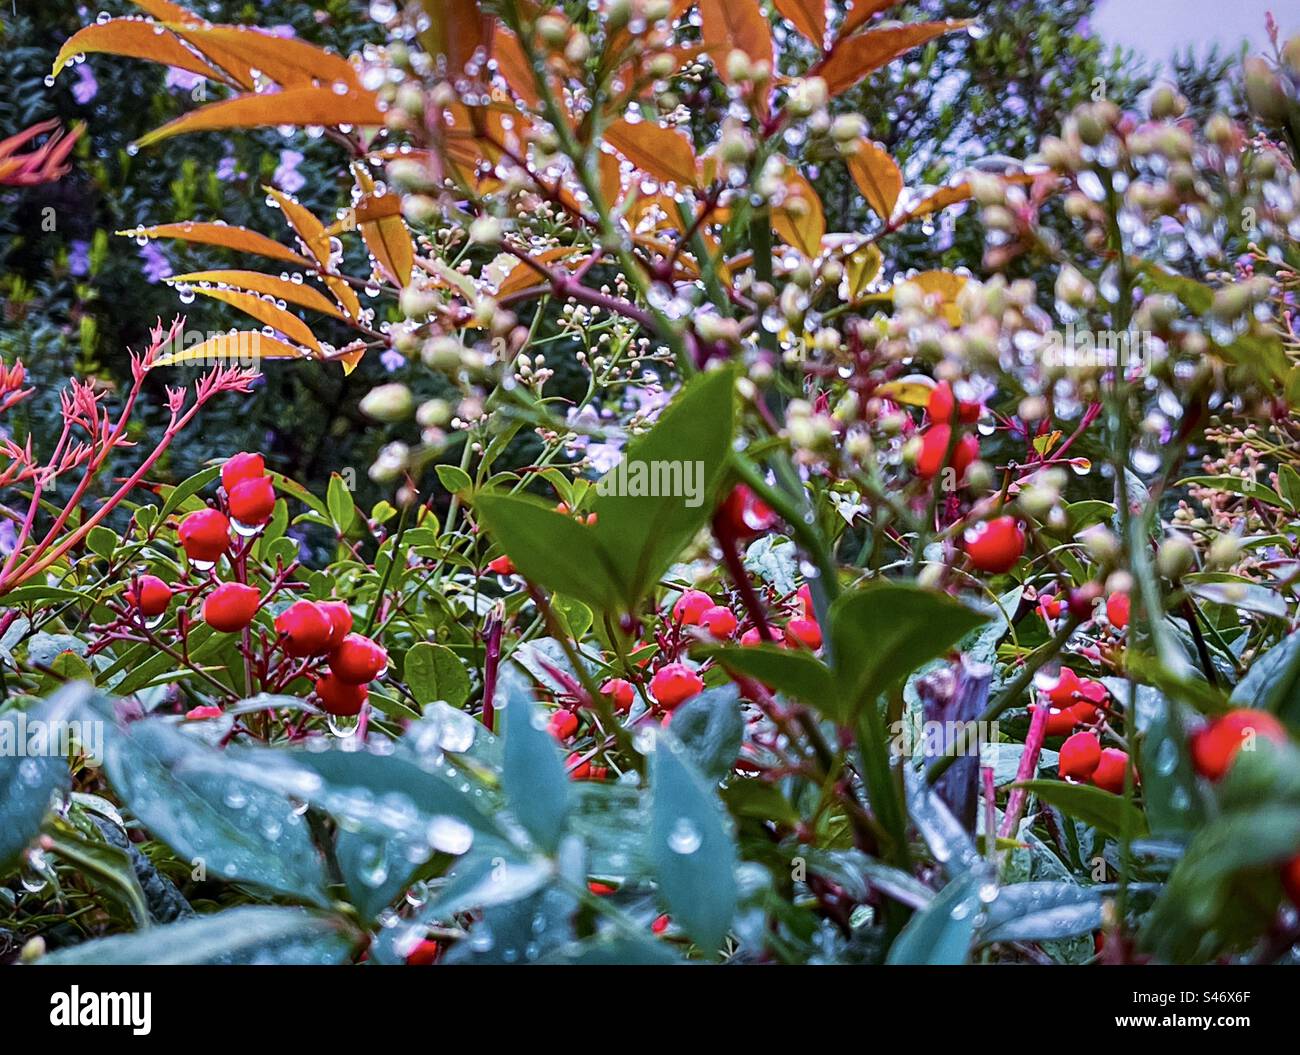 Red berries of Ardisia crenata aka Christmas berry/ Australian holly surrounded by flowering shrubs and foliage drenched with raindrops on a cold, wet winter day in Melbourne, Australia. Stock Photo